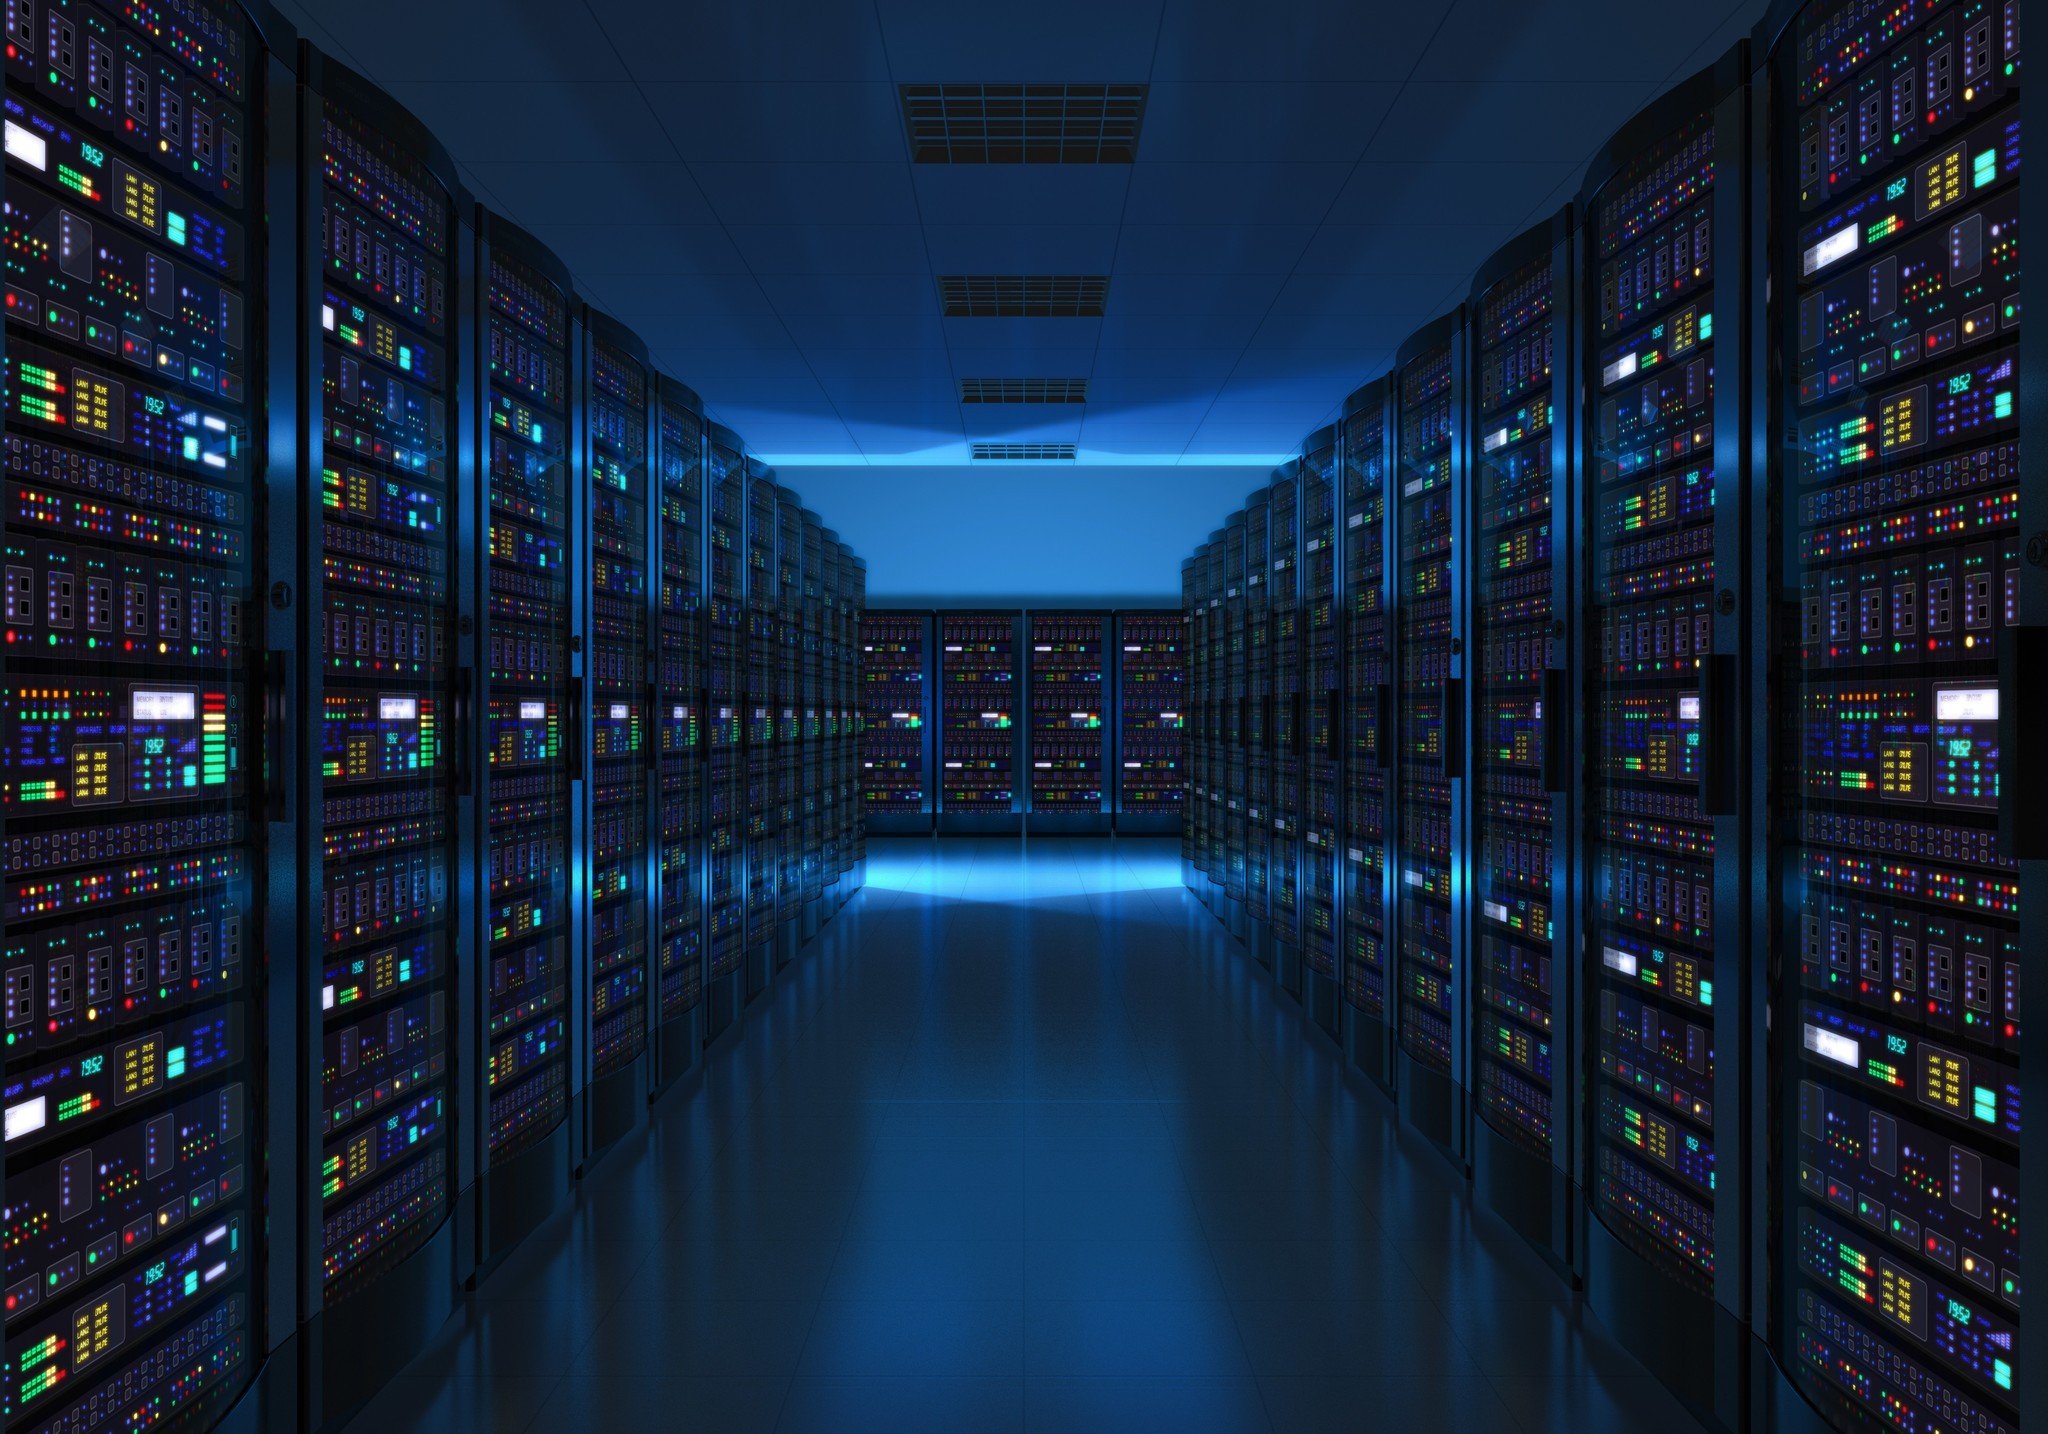 Image of a data center